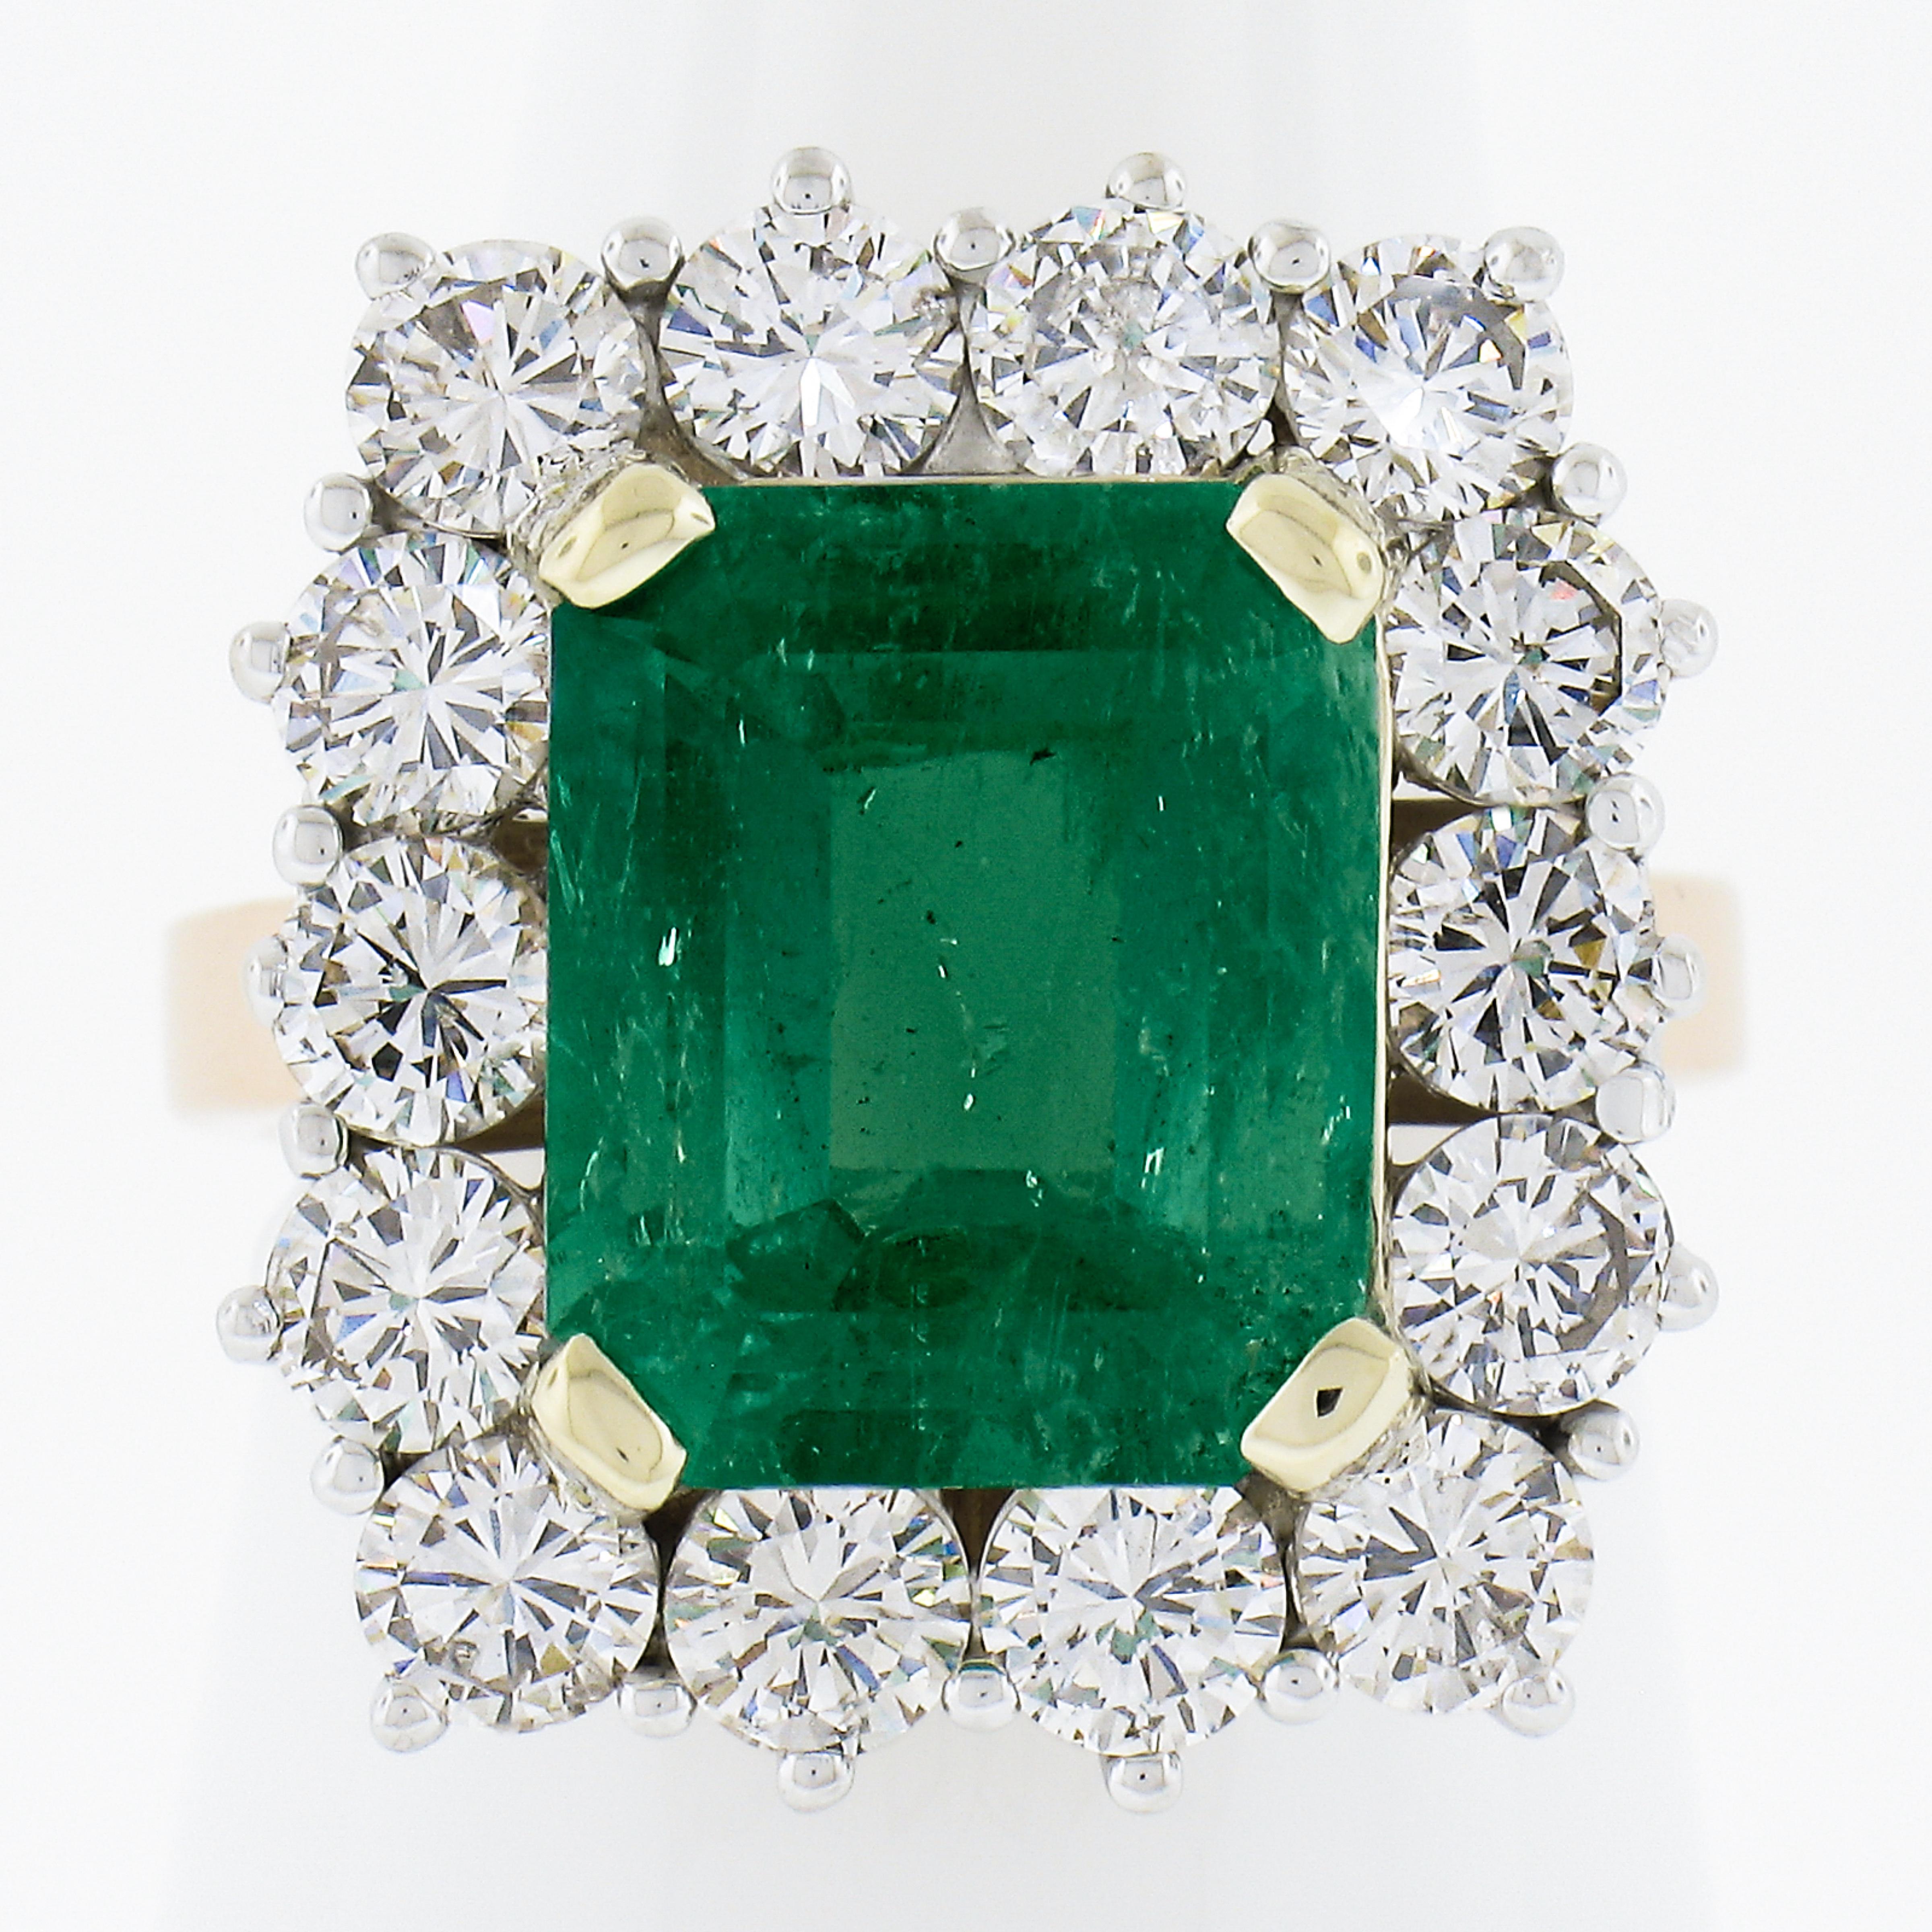 --Stone(s):--
(1) Natural Genuine Emerald - Rectangular Cut - Prong Set - VERY Happy Lively Green Clean Color - 5.33ct (exact, certified)
** See Certification Details Below for Complete Info **
(14) Natural Genuine Diamonds - Round Brilliant Cut -